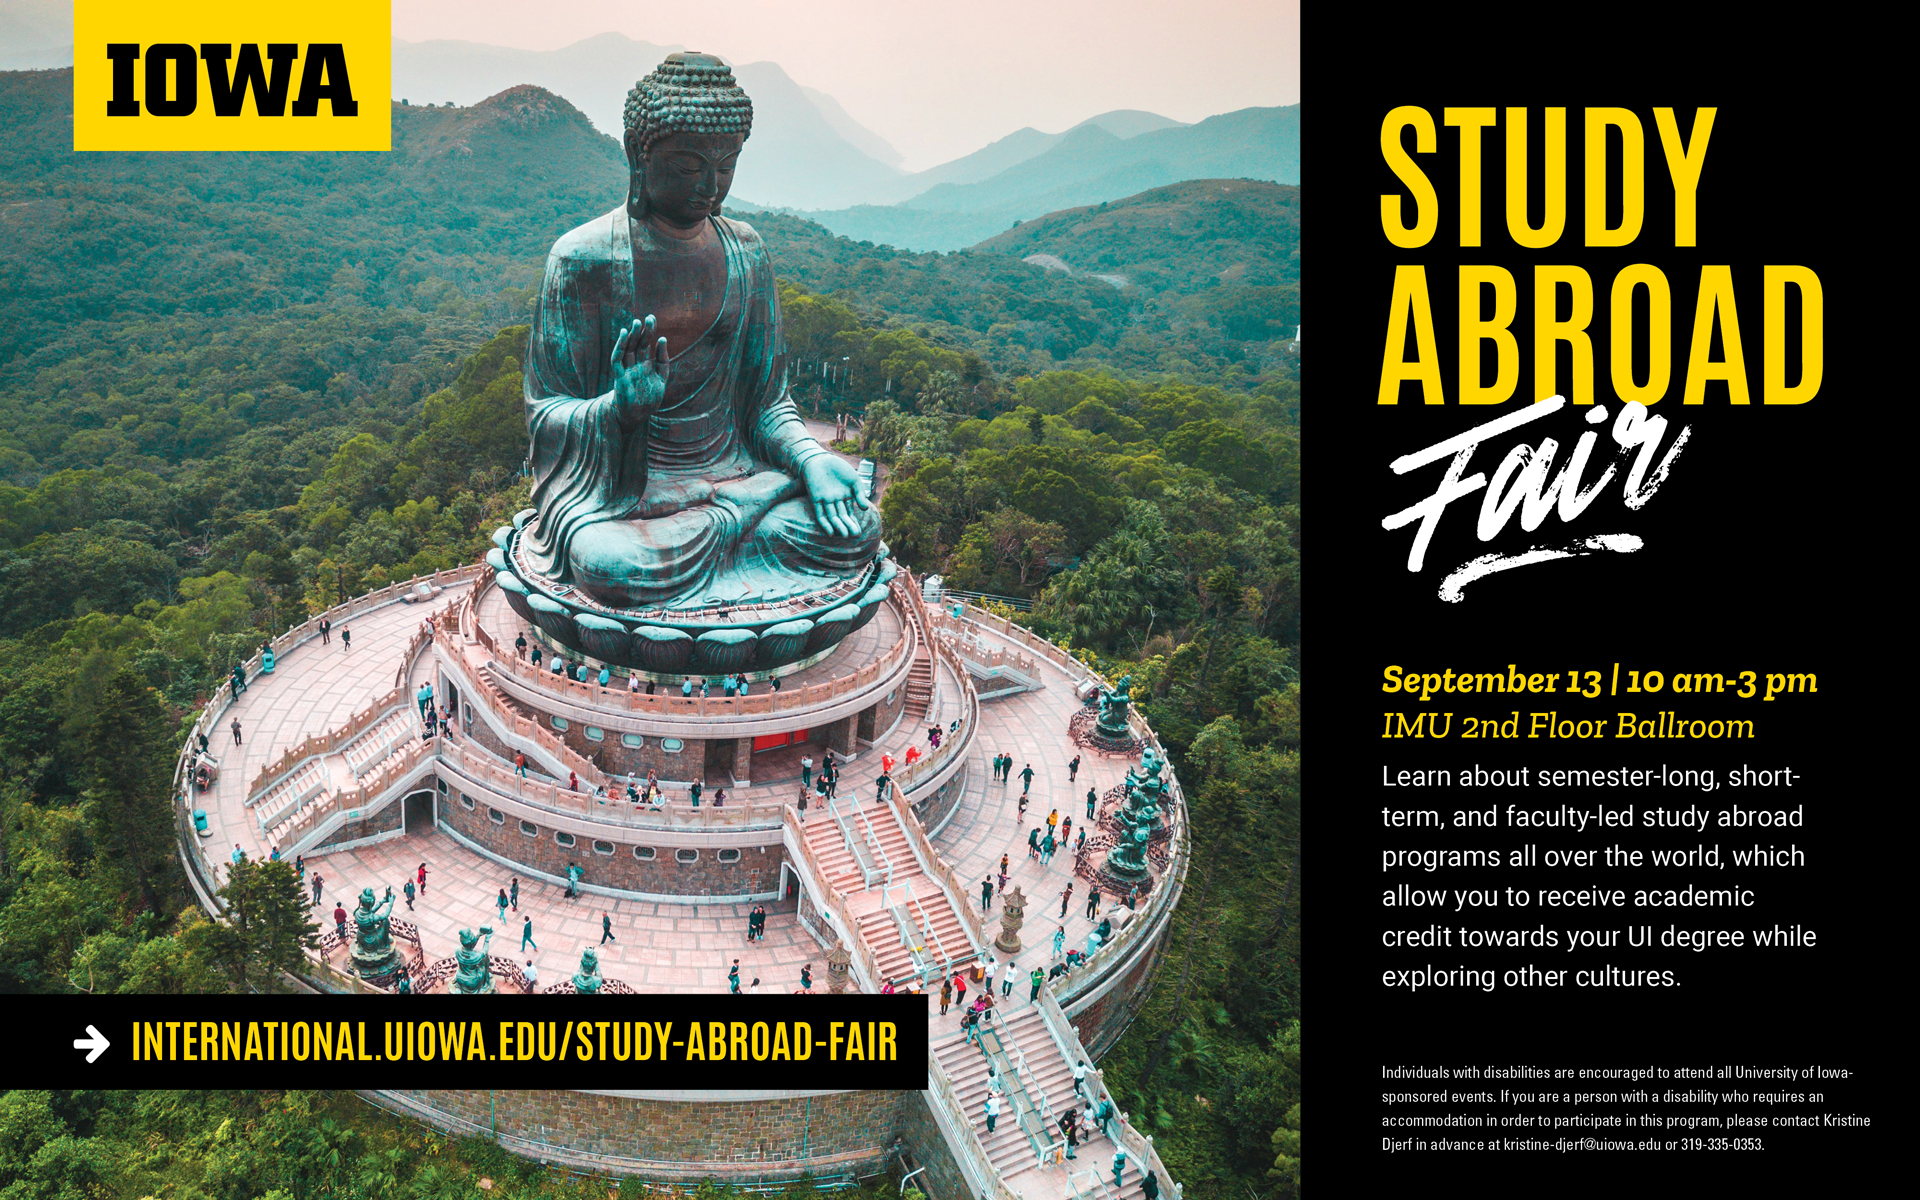 Study abroad fair is September 13, 10 am - 3 pm in the IMU 2nd floor ballroom